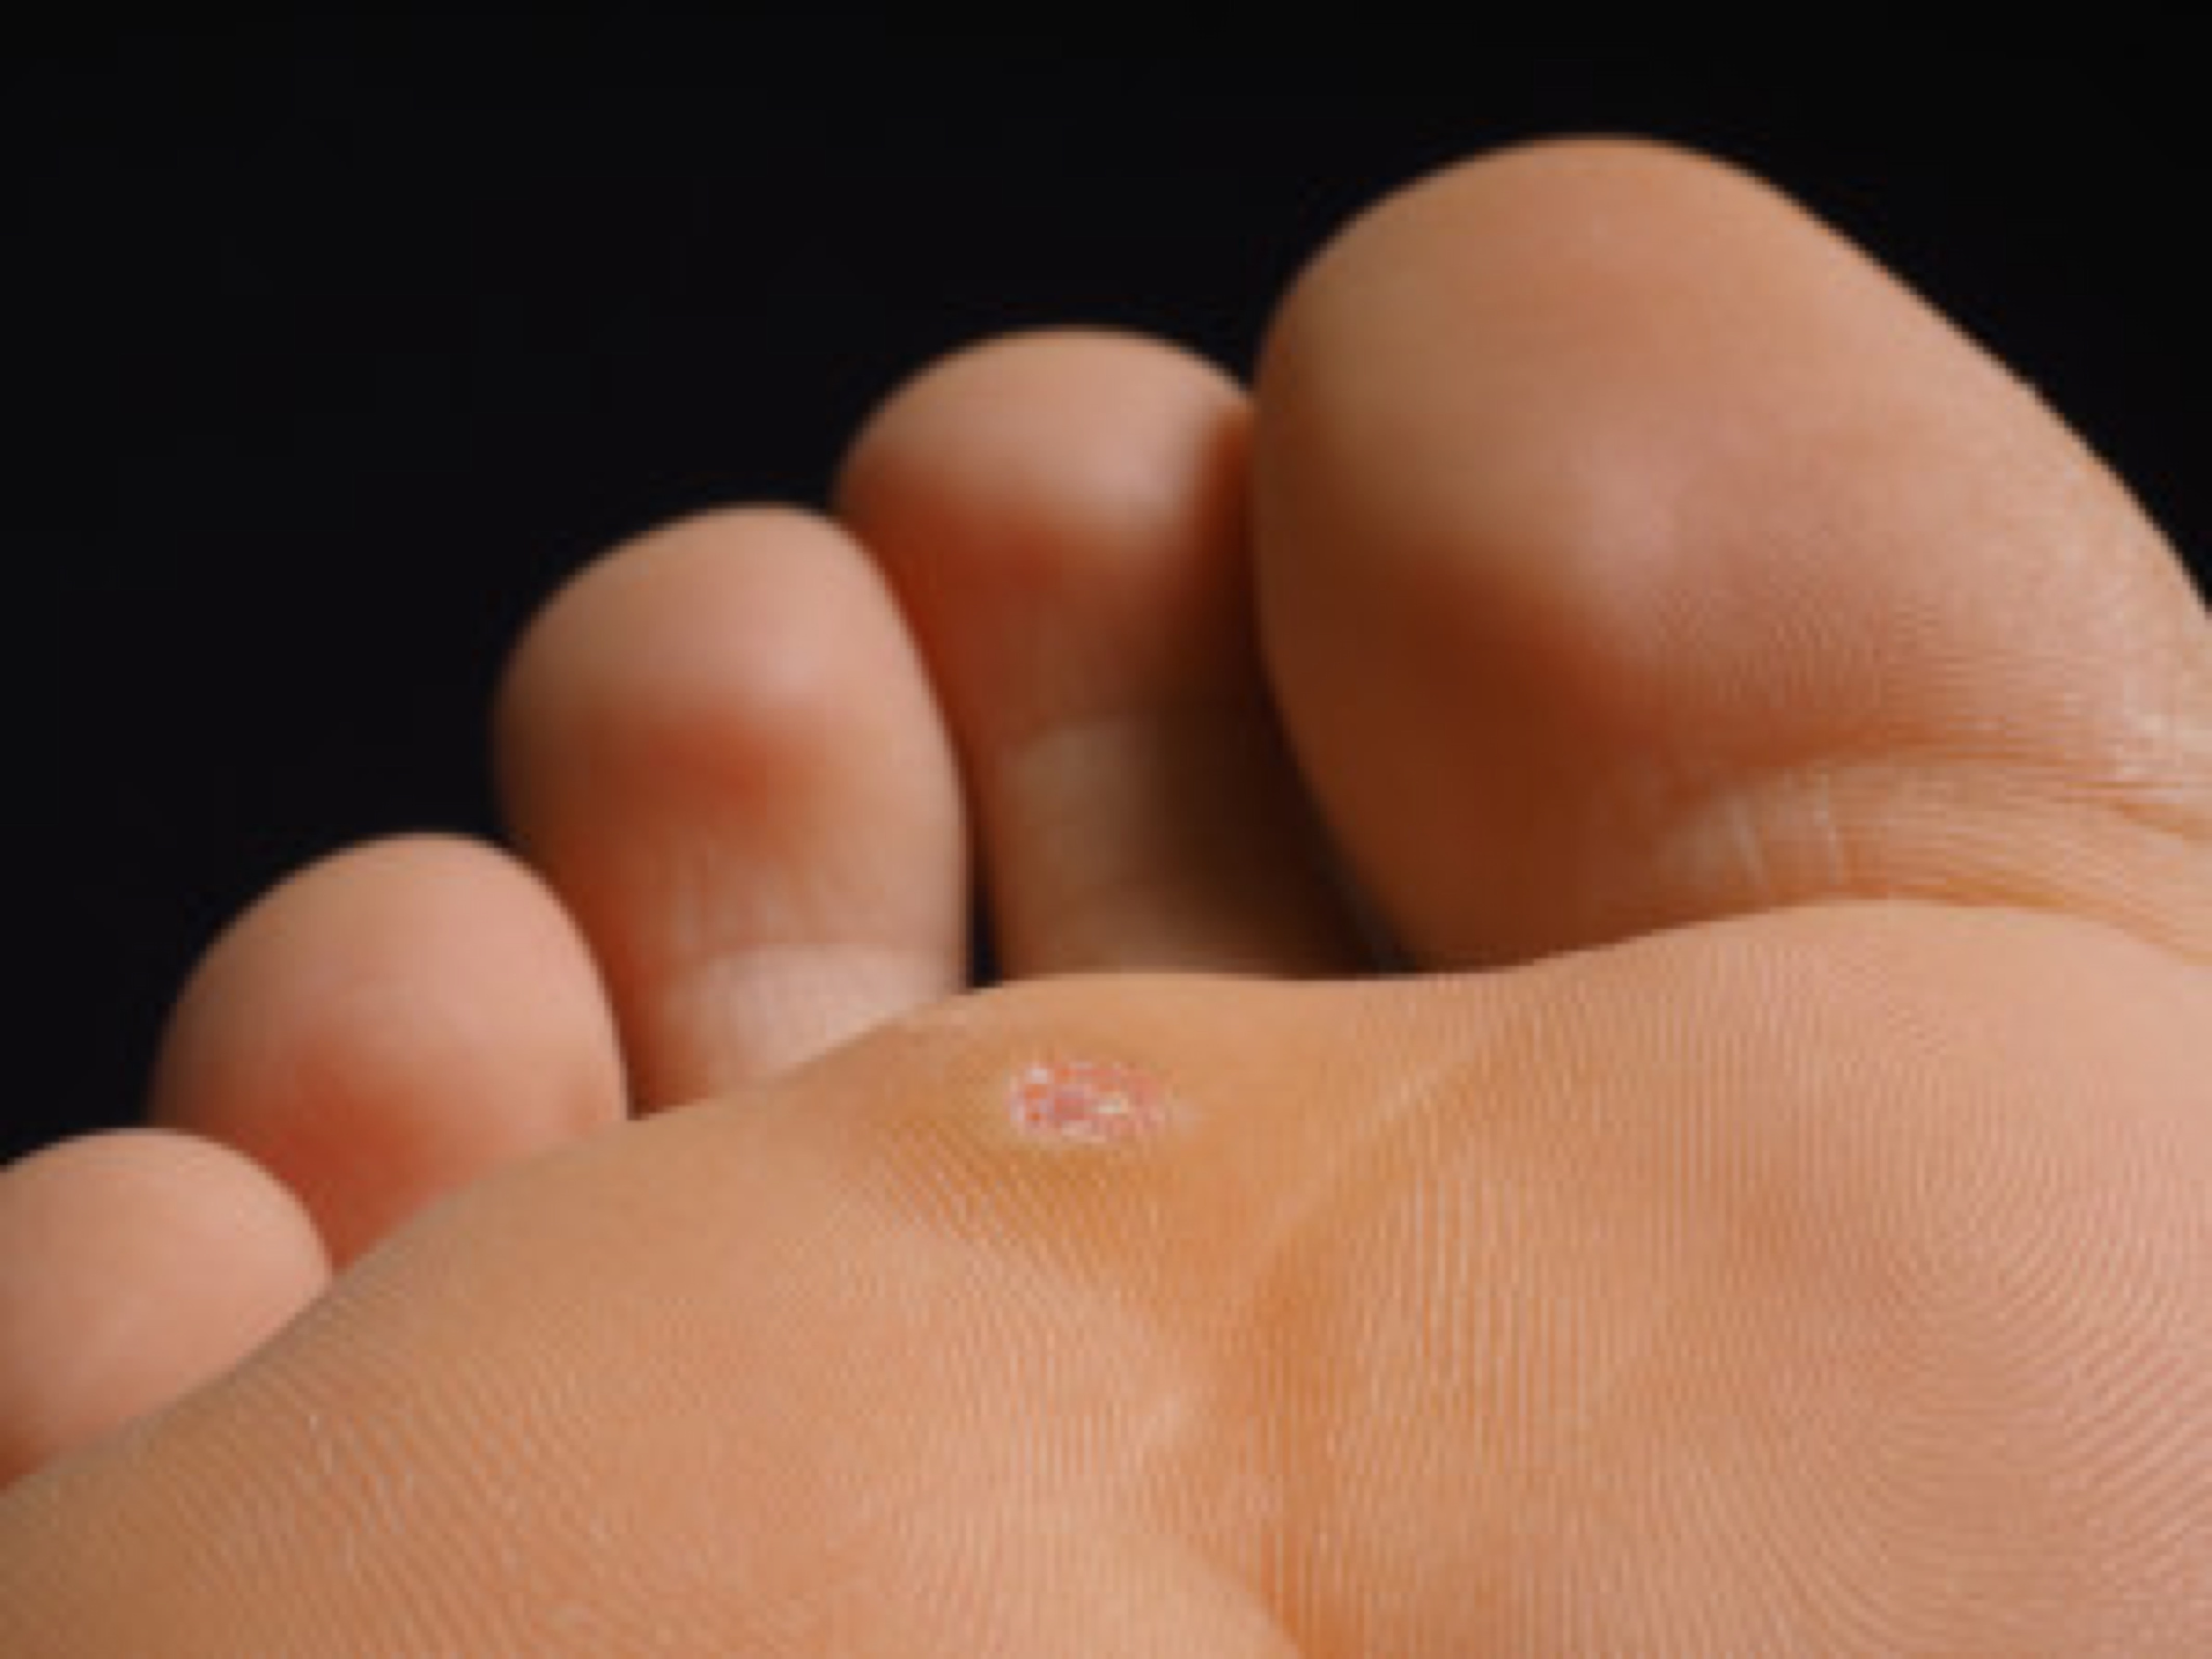 Closeup of foot with a infected wart placed under toes, isolated towards black